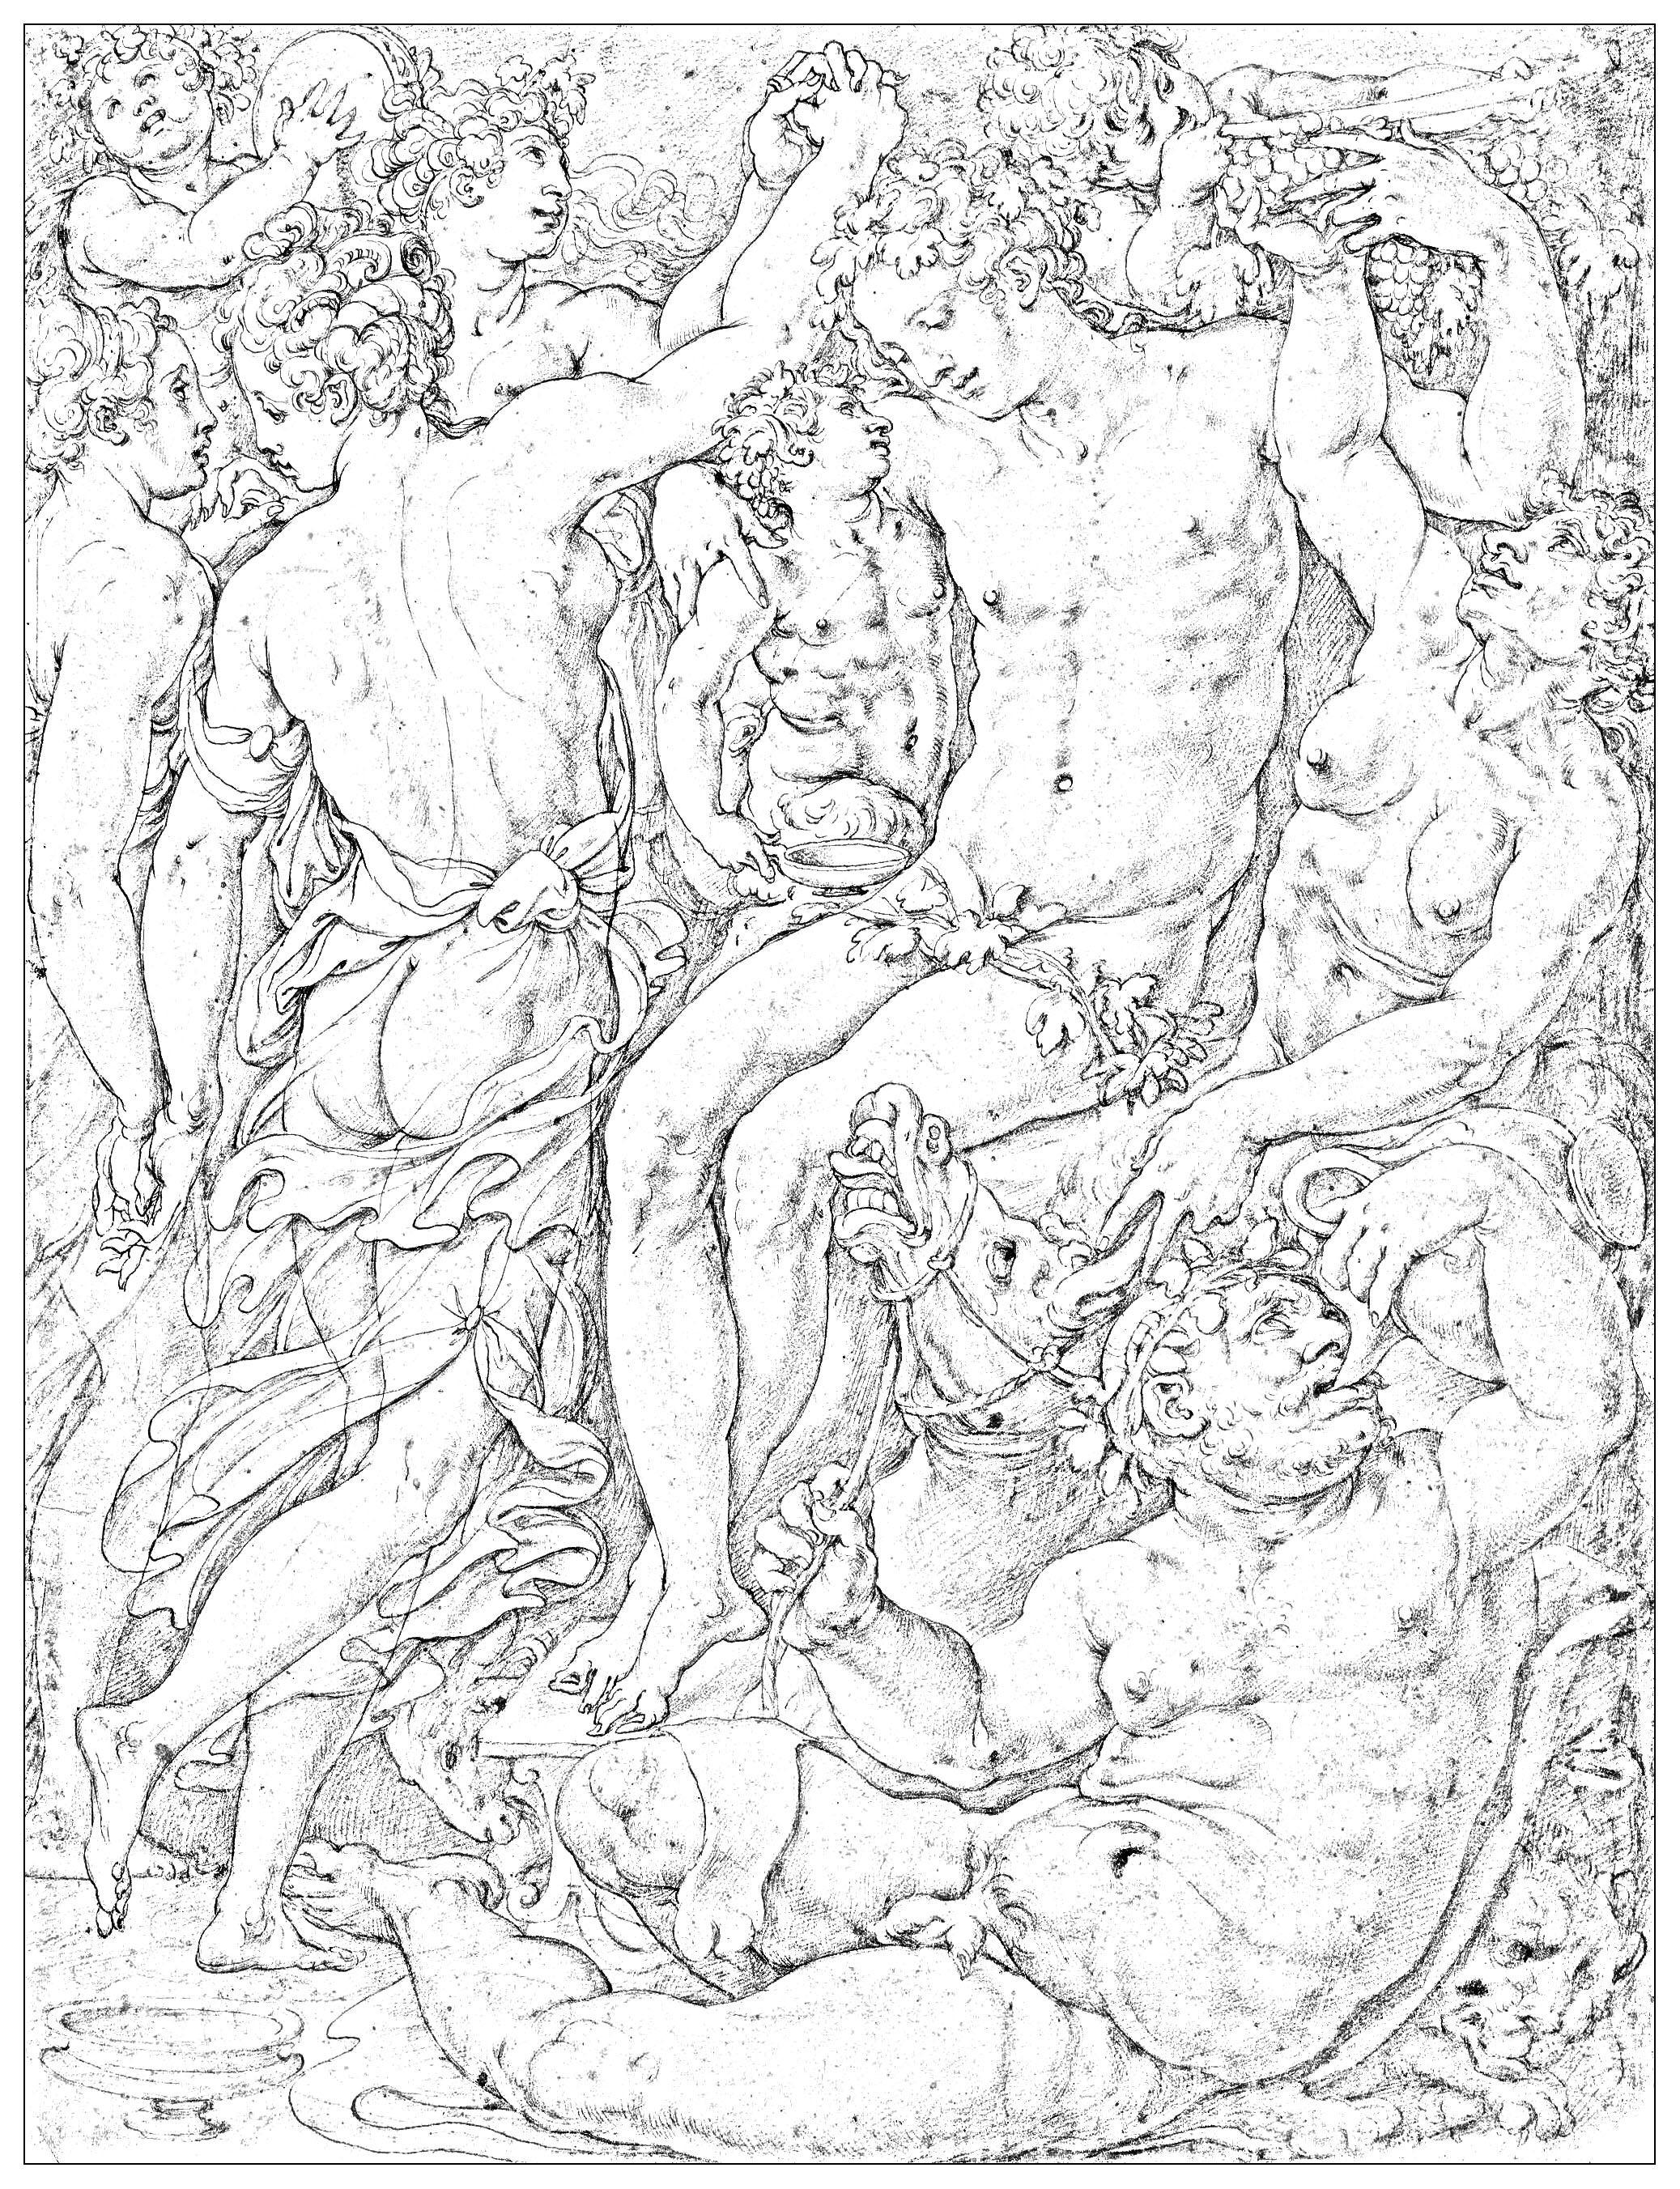 A drawing by Giorgio Vasari (1511 - 1574): 'Bacchanal: Bacchus, Silenus, Fauns and Maenads'. Painting exhibited at the Musée du Louvre (see original)